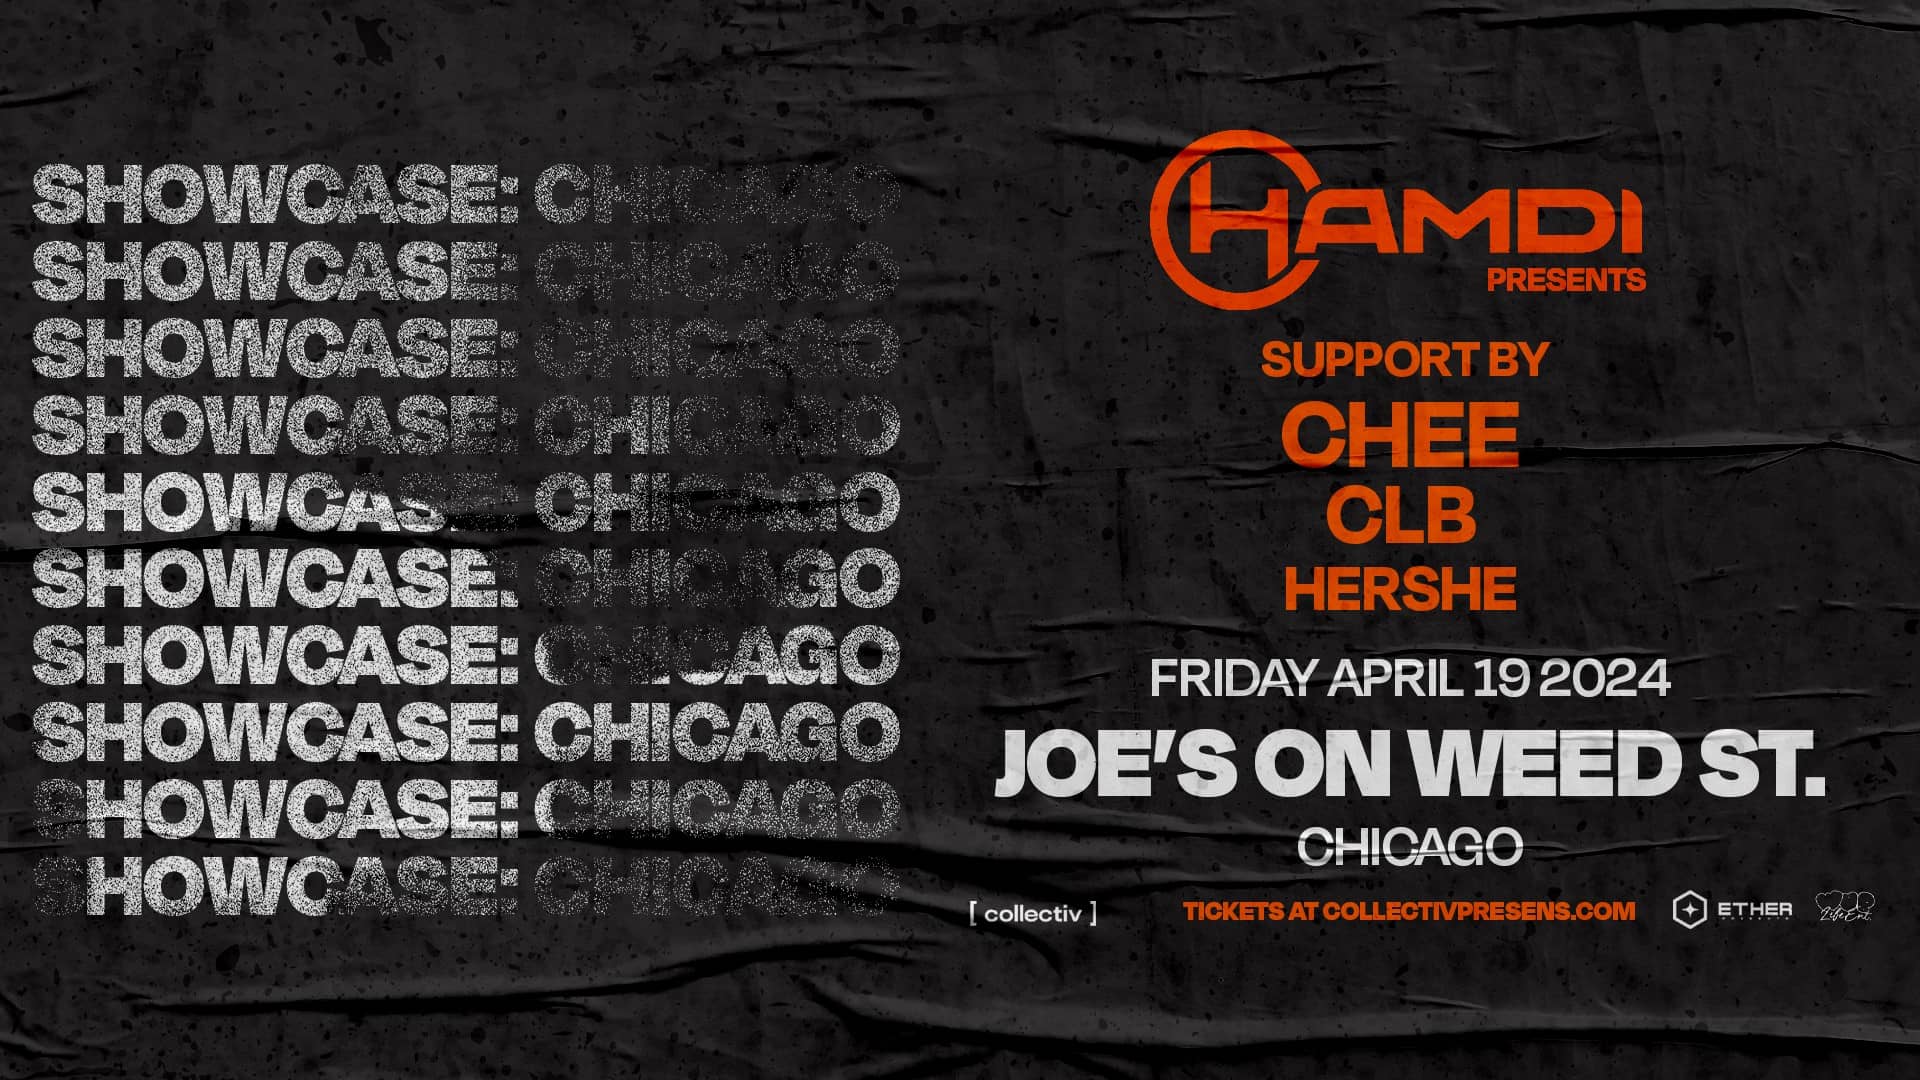 Poster for Hamdi on April 19, 2024 at Joe's on Weed St.